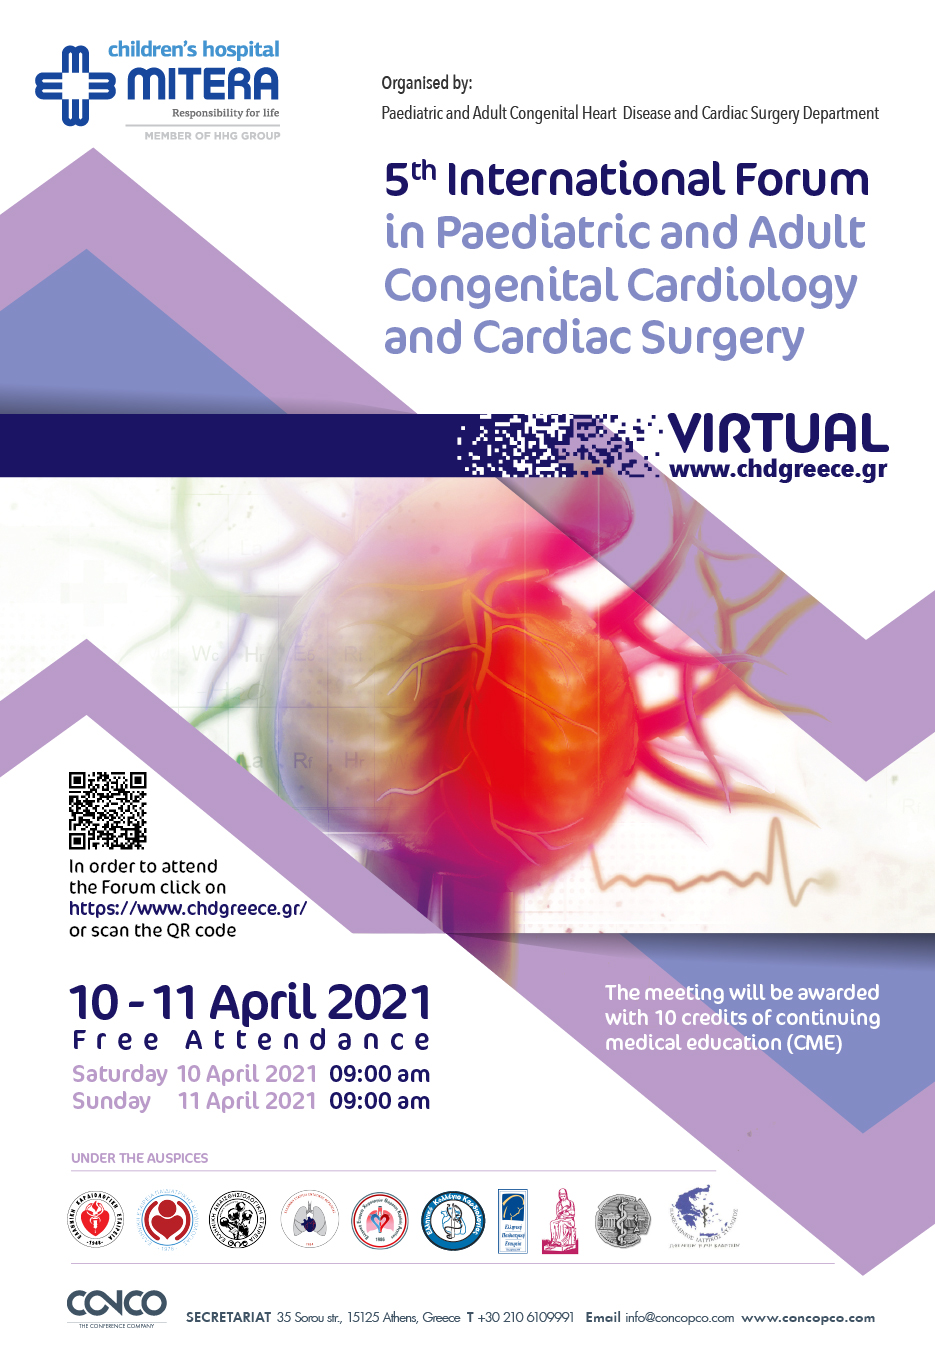 5th International Forum in Paediatric and Adult Congenital Cardiology and Cardiac Surgery